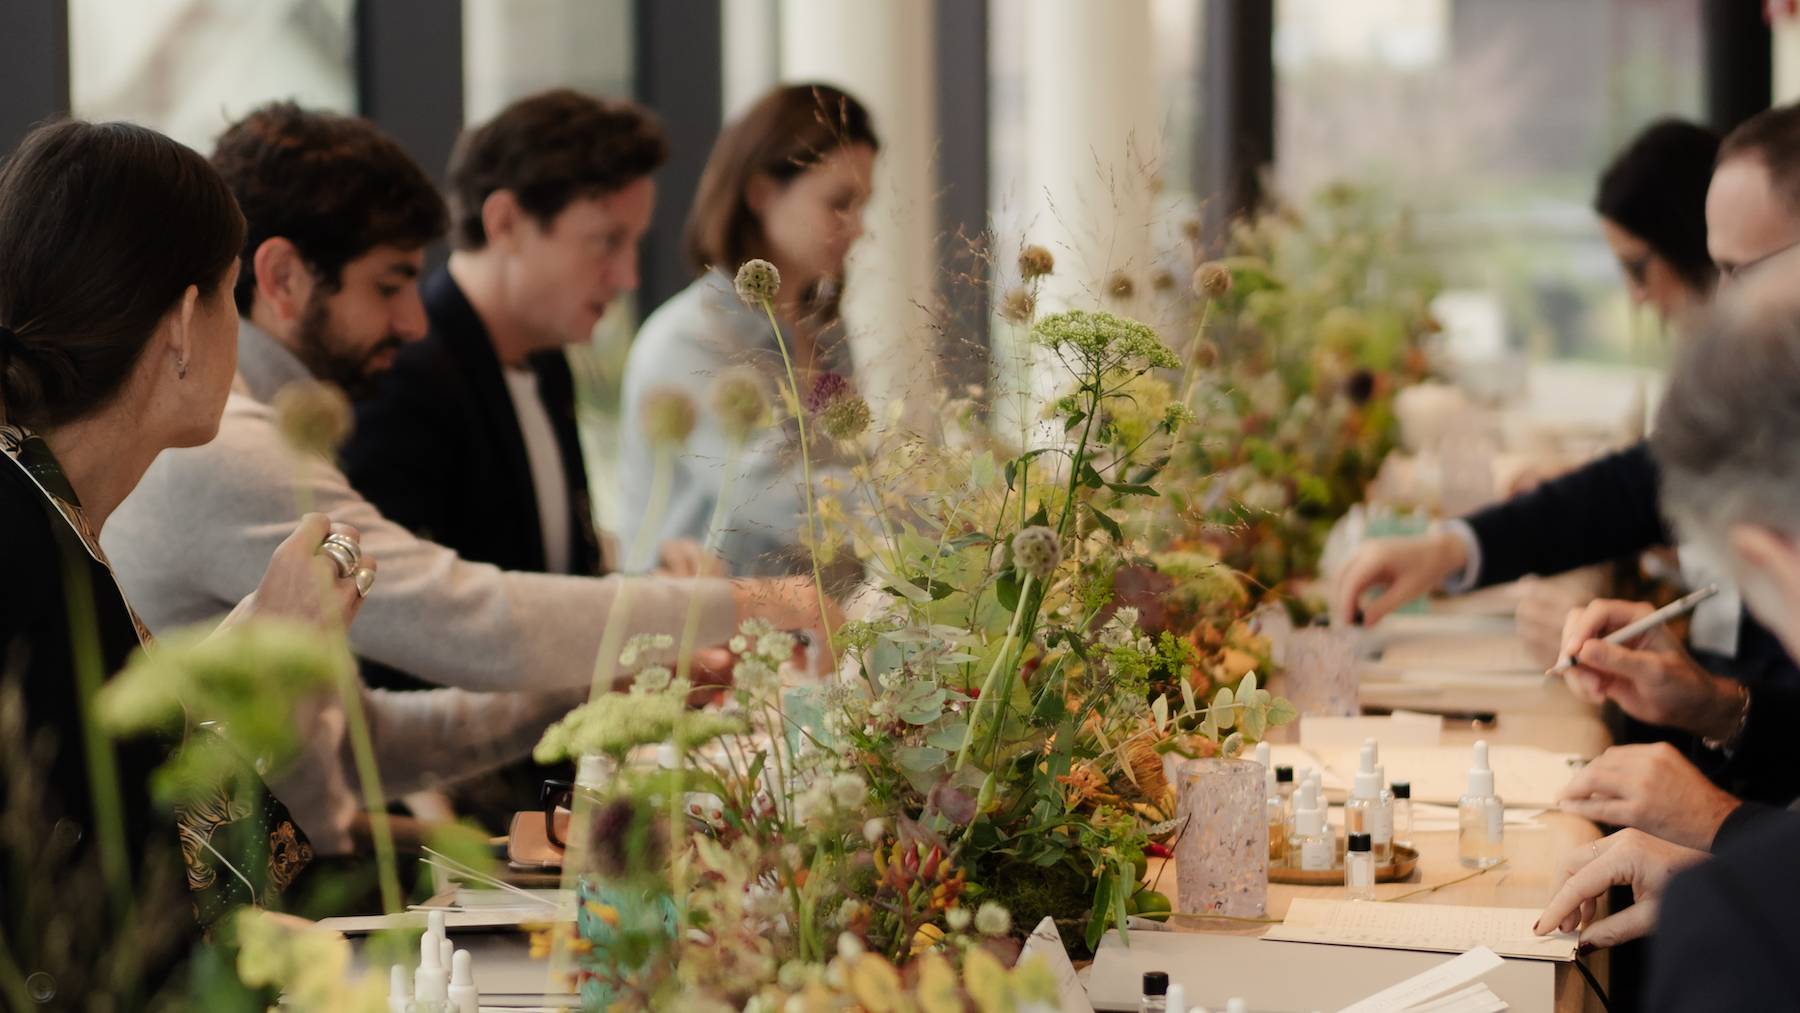 Attendees making perfurmes at a table during the Integra Fragrances x BoF executive breakfast and fragrance workshop.